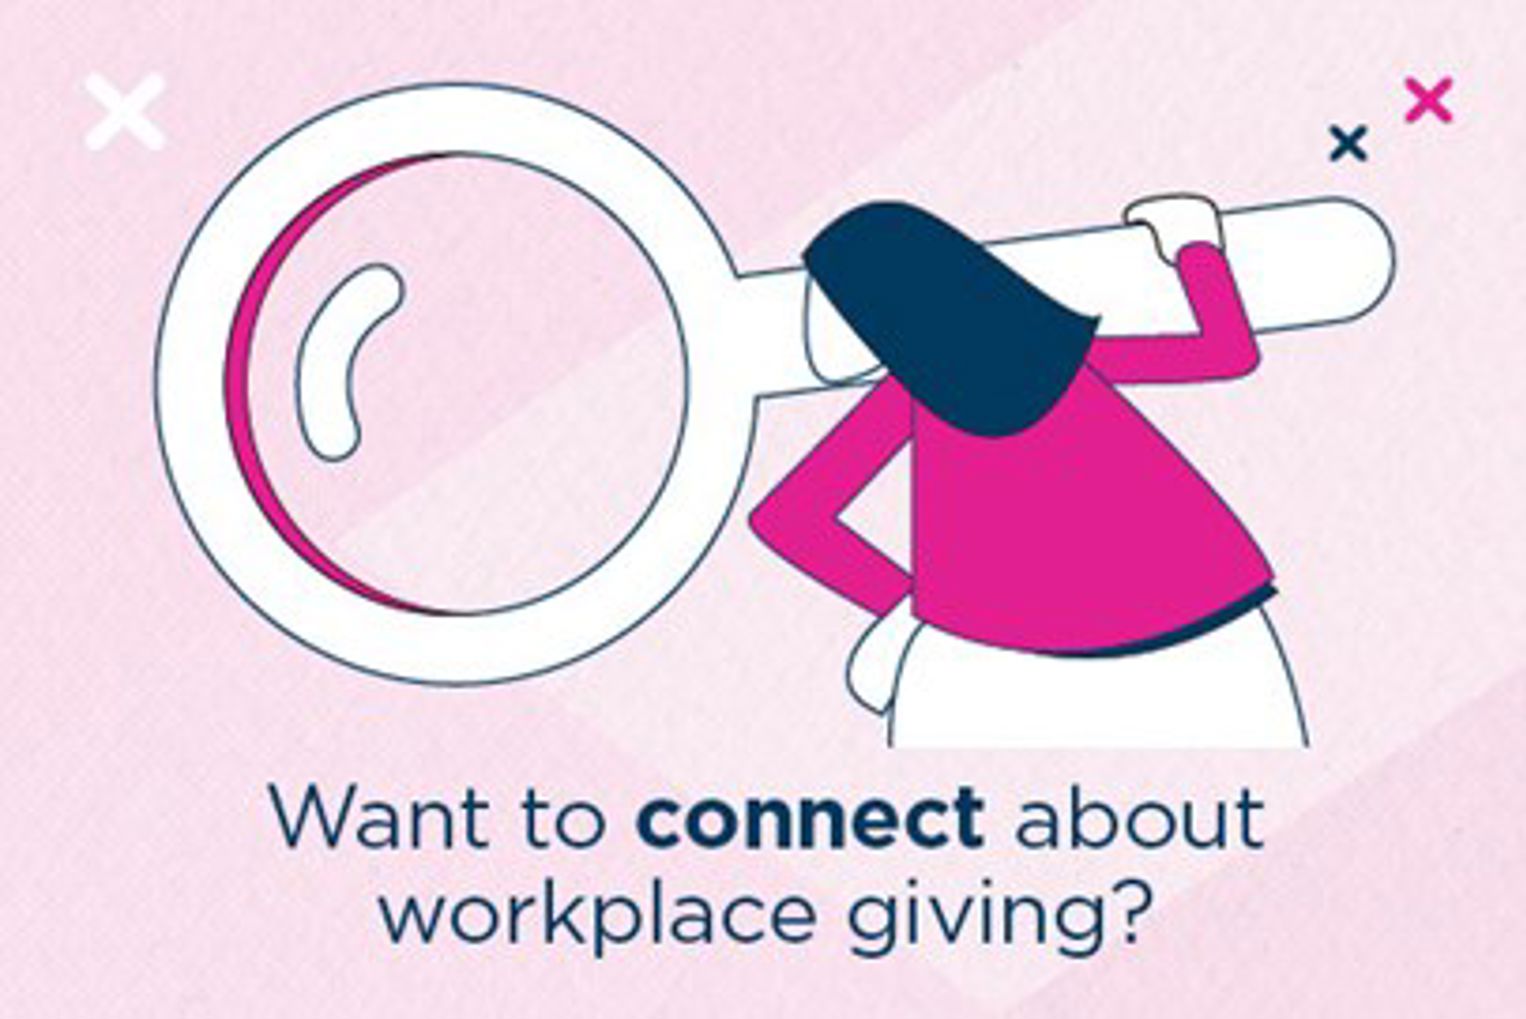 Workplace giving program